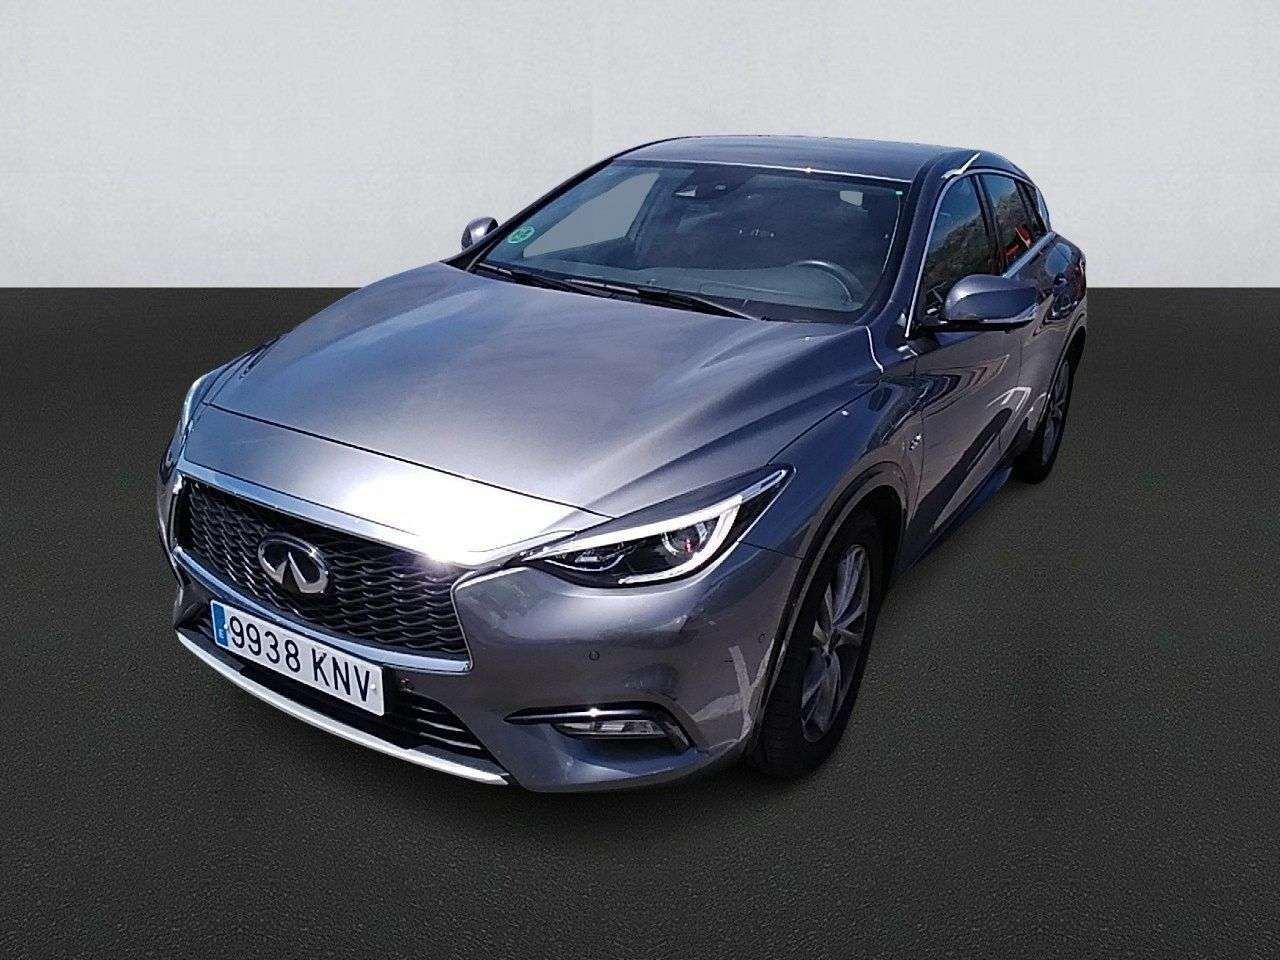 Infiniti Q30 Compact in Grey used in LEON for € 21,500.-